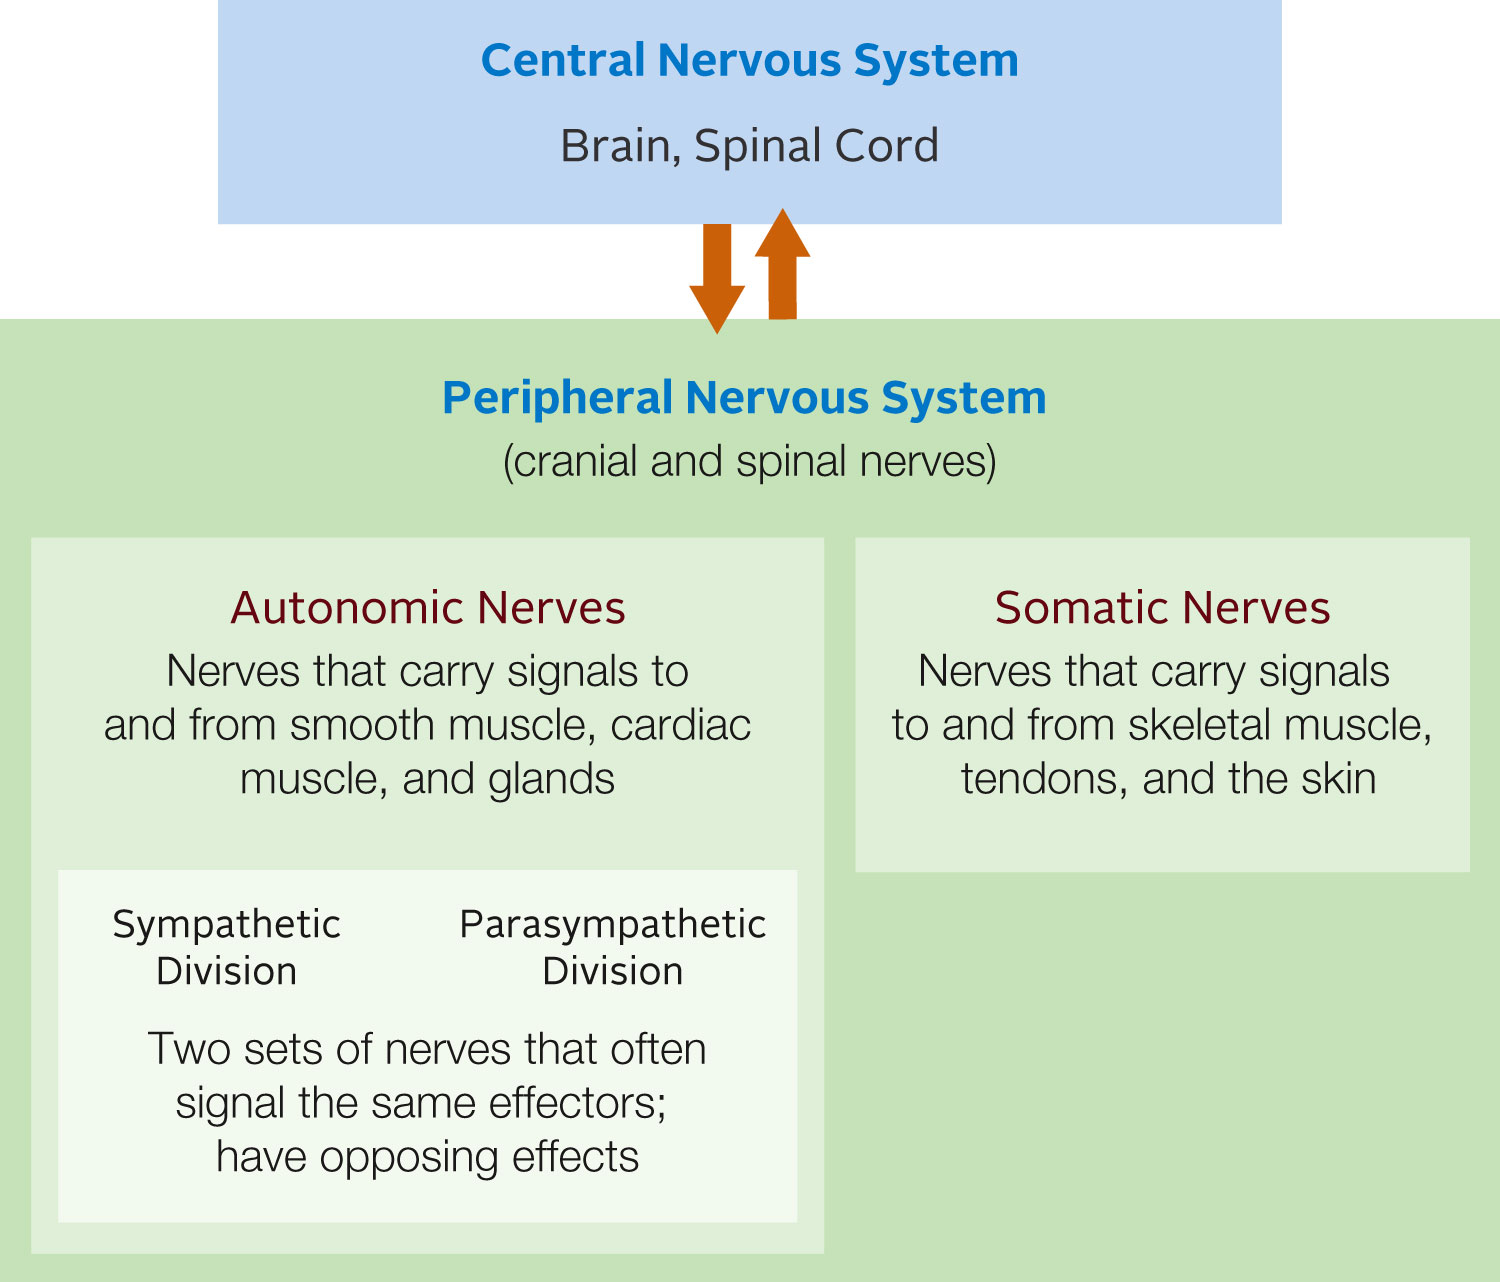 Functional divisions of vertebrate nervous systems